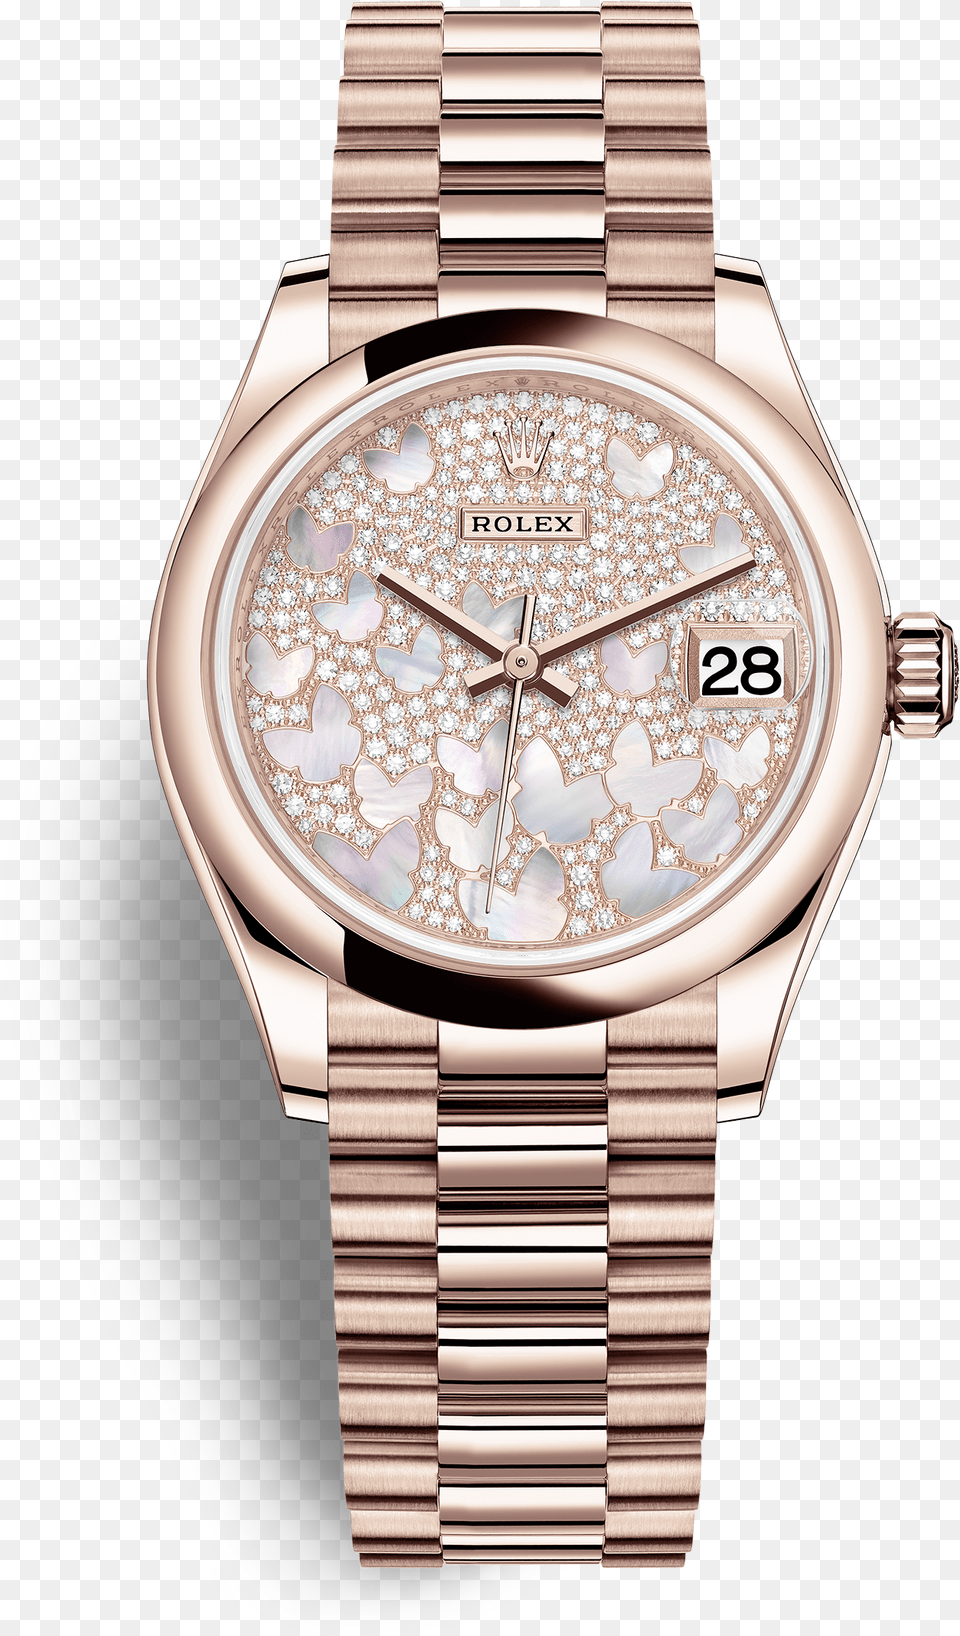 Datejust Rolex Datejust Butterfly, Arm, Body Part, Person, Wristwatch Png Image